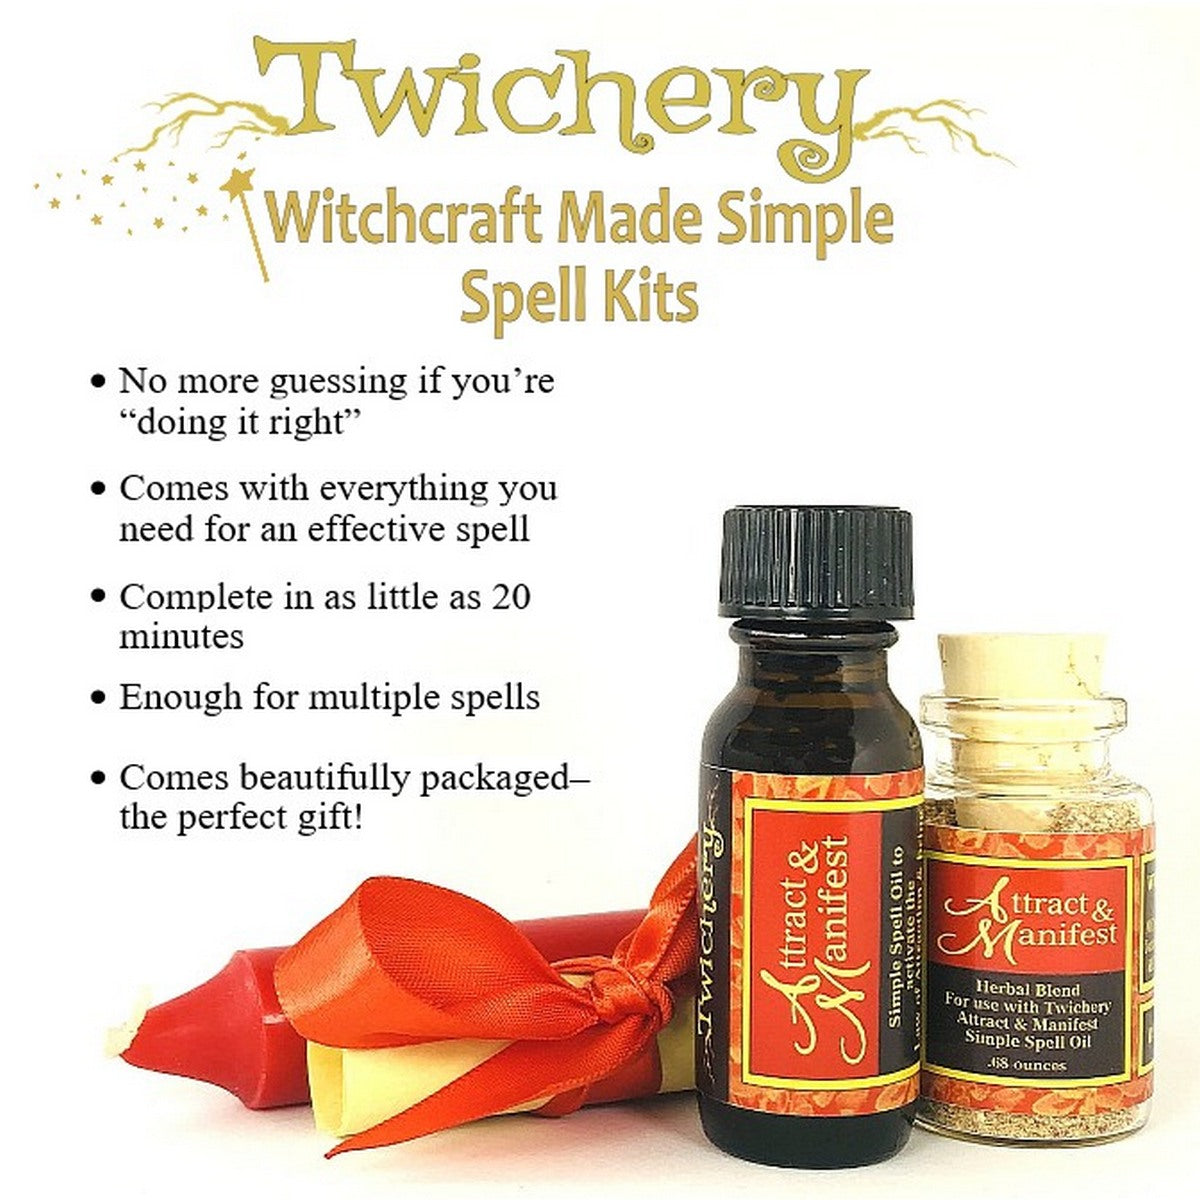 Witchcraft Made Simple -  Attract & Manifest - Twichery - Comes with instructions - ten simple steps - Hoodoo Voodoo Wicca Pagan Nondenominational Witchcraft